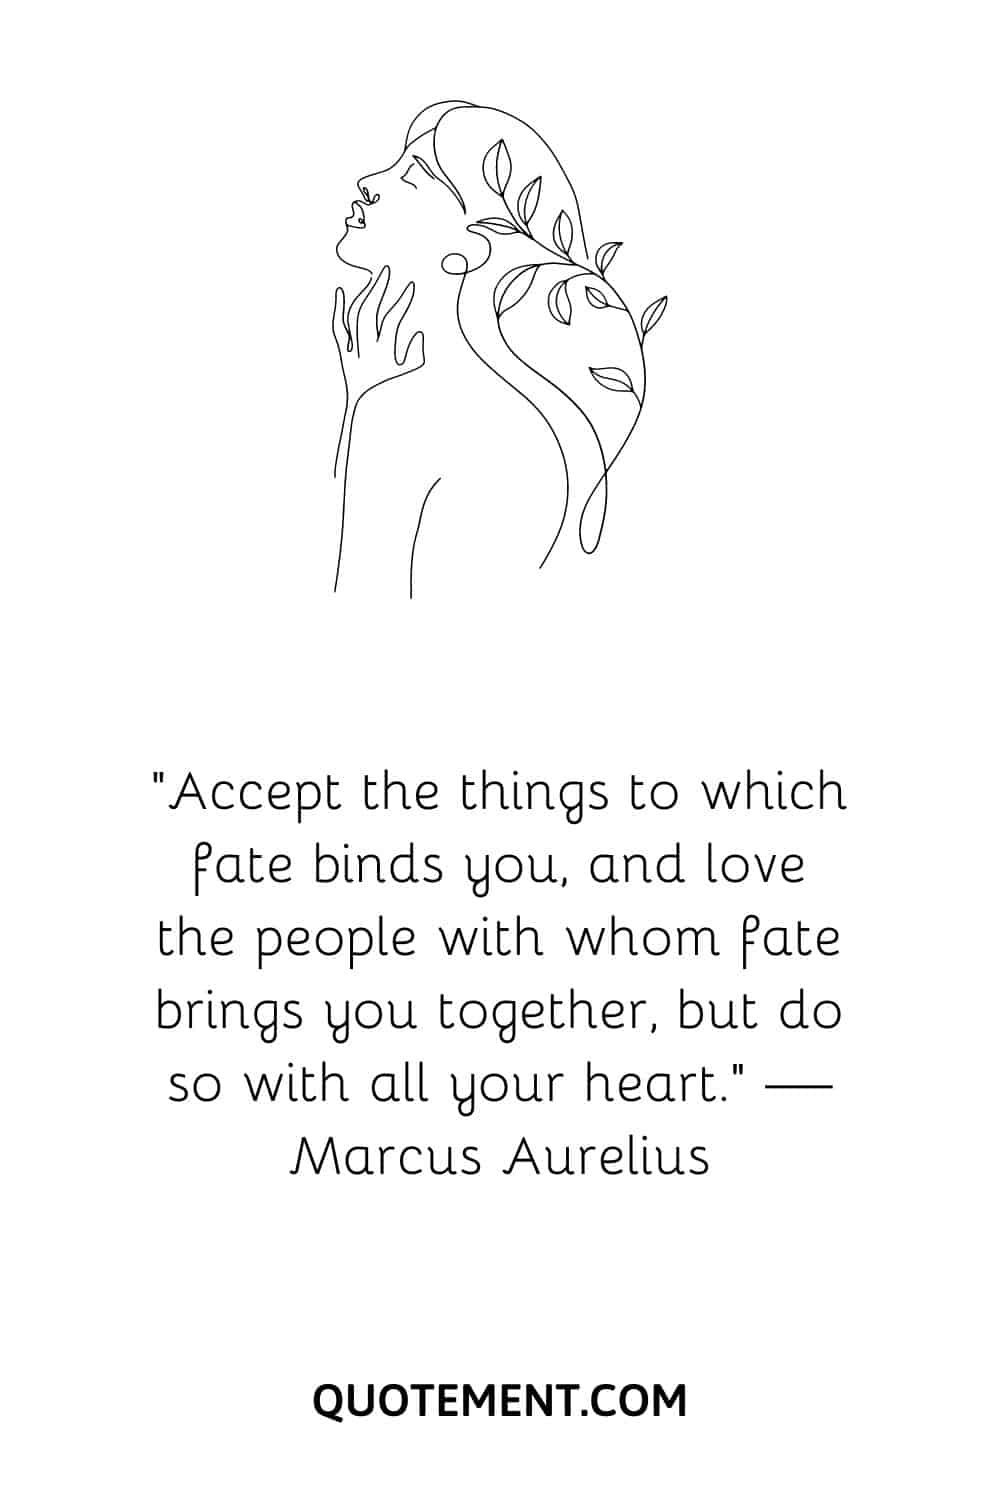 “Accept the things to which fate binds you, and love the people with whom fate brings you together, but do so with all your heart.” — Marcus Aurelius